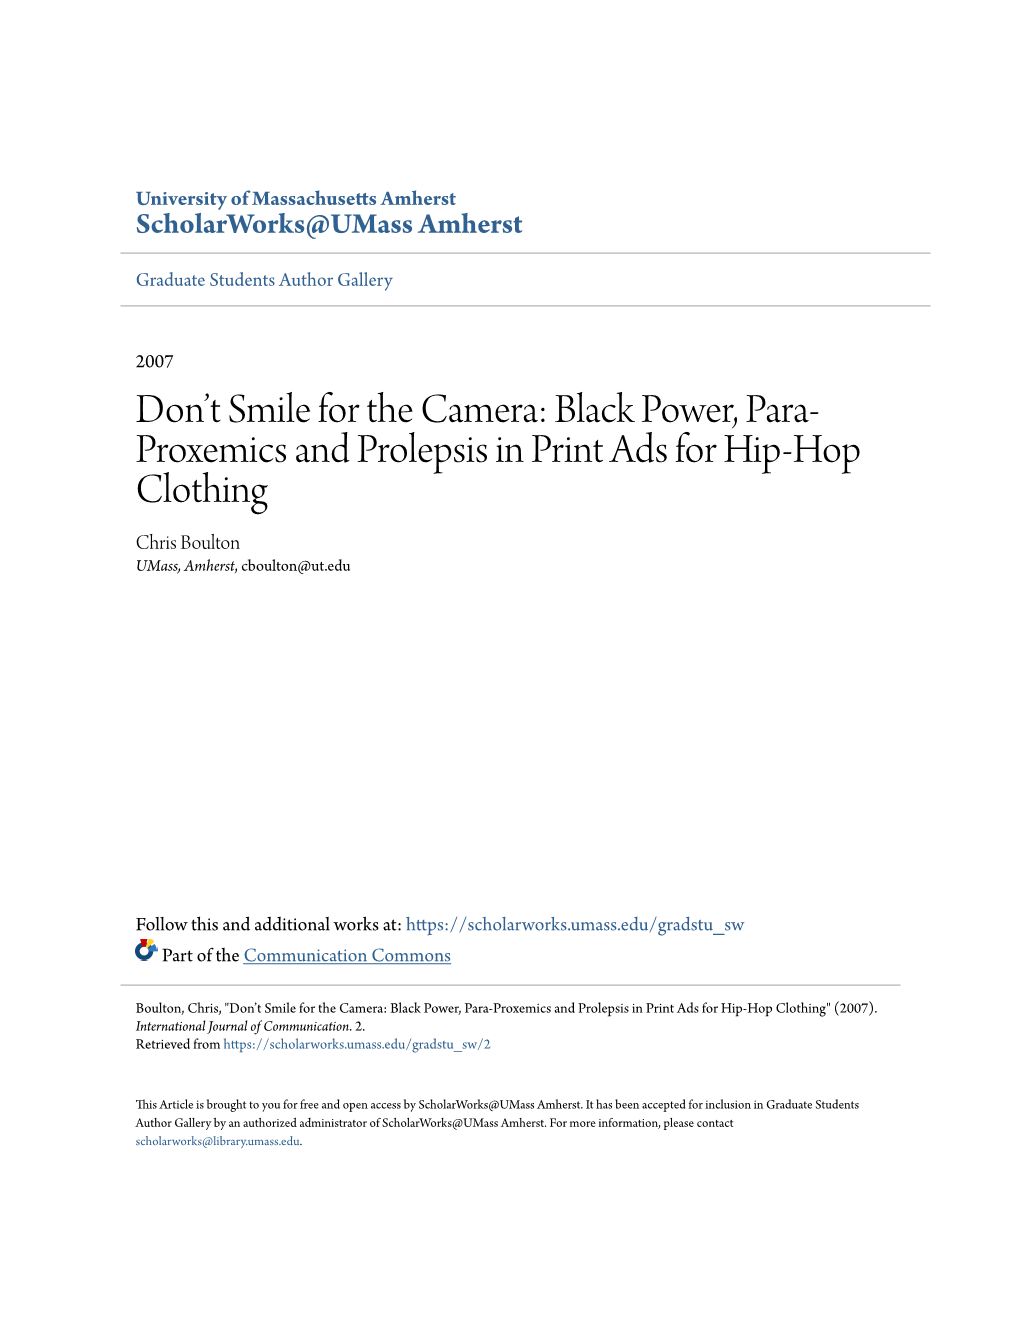 Don't Smile for the Camera: Black Power, Para-Proxemics and Prolepsis in Print Ads for Hip-Hop Clothing